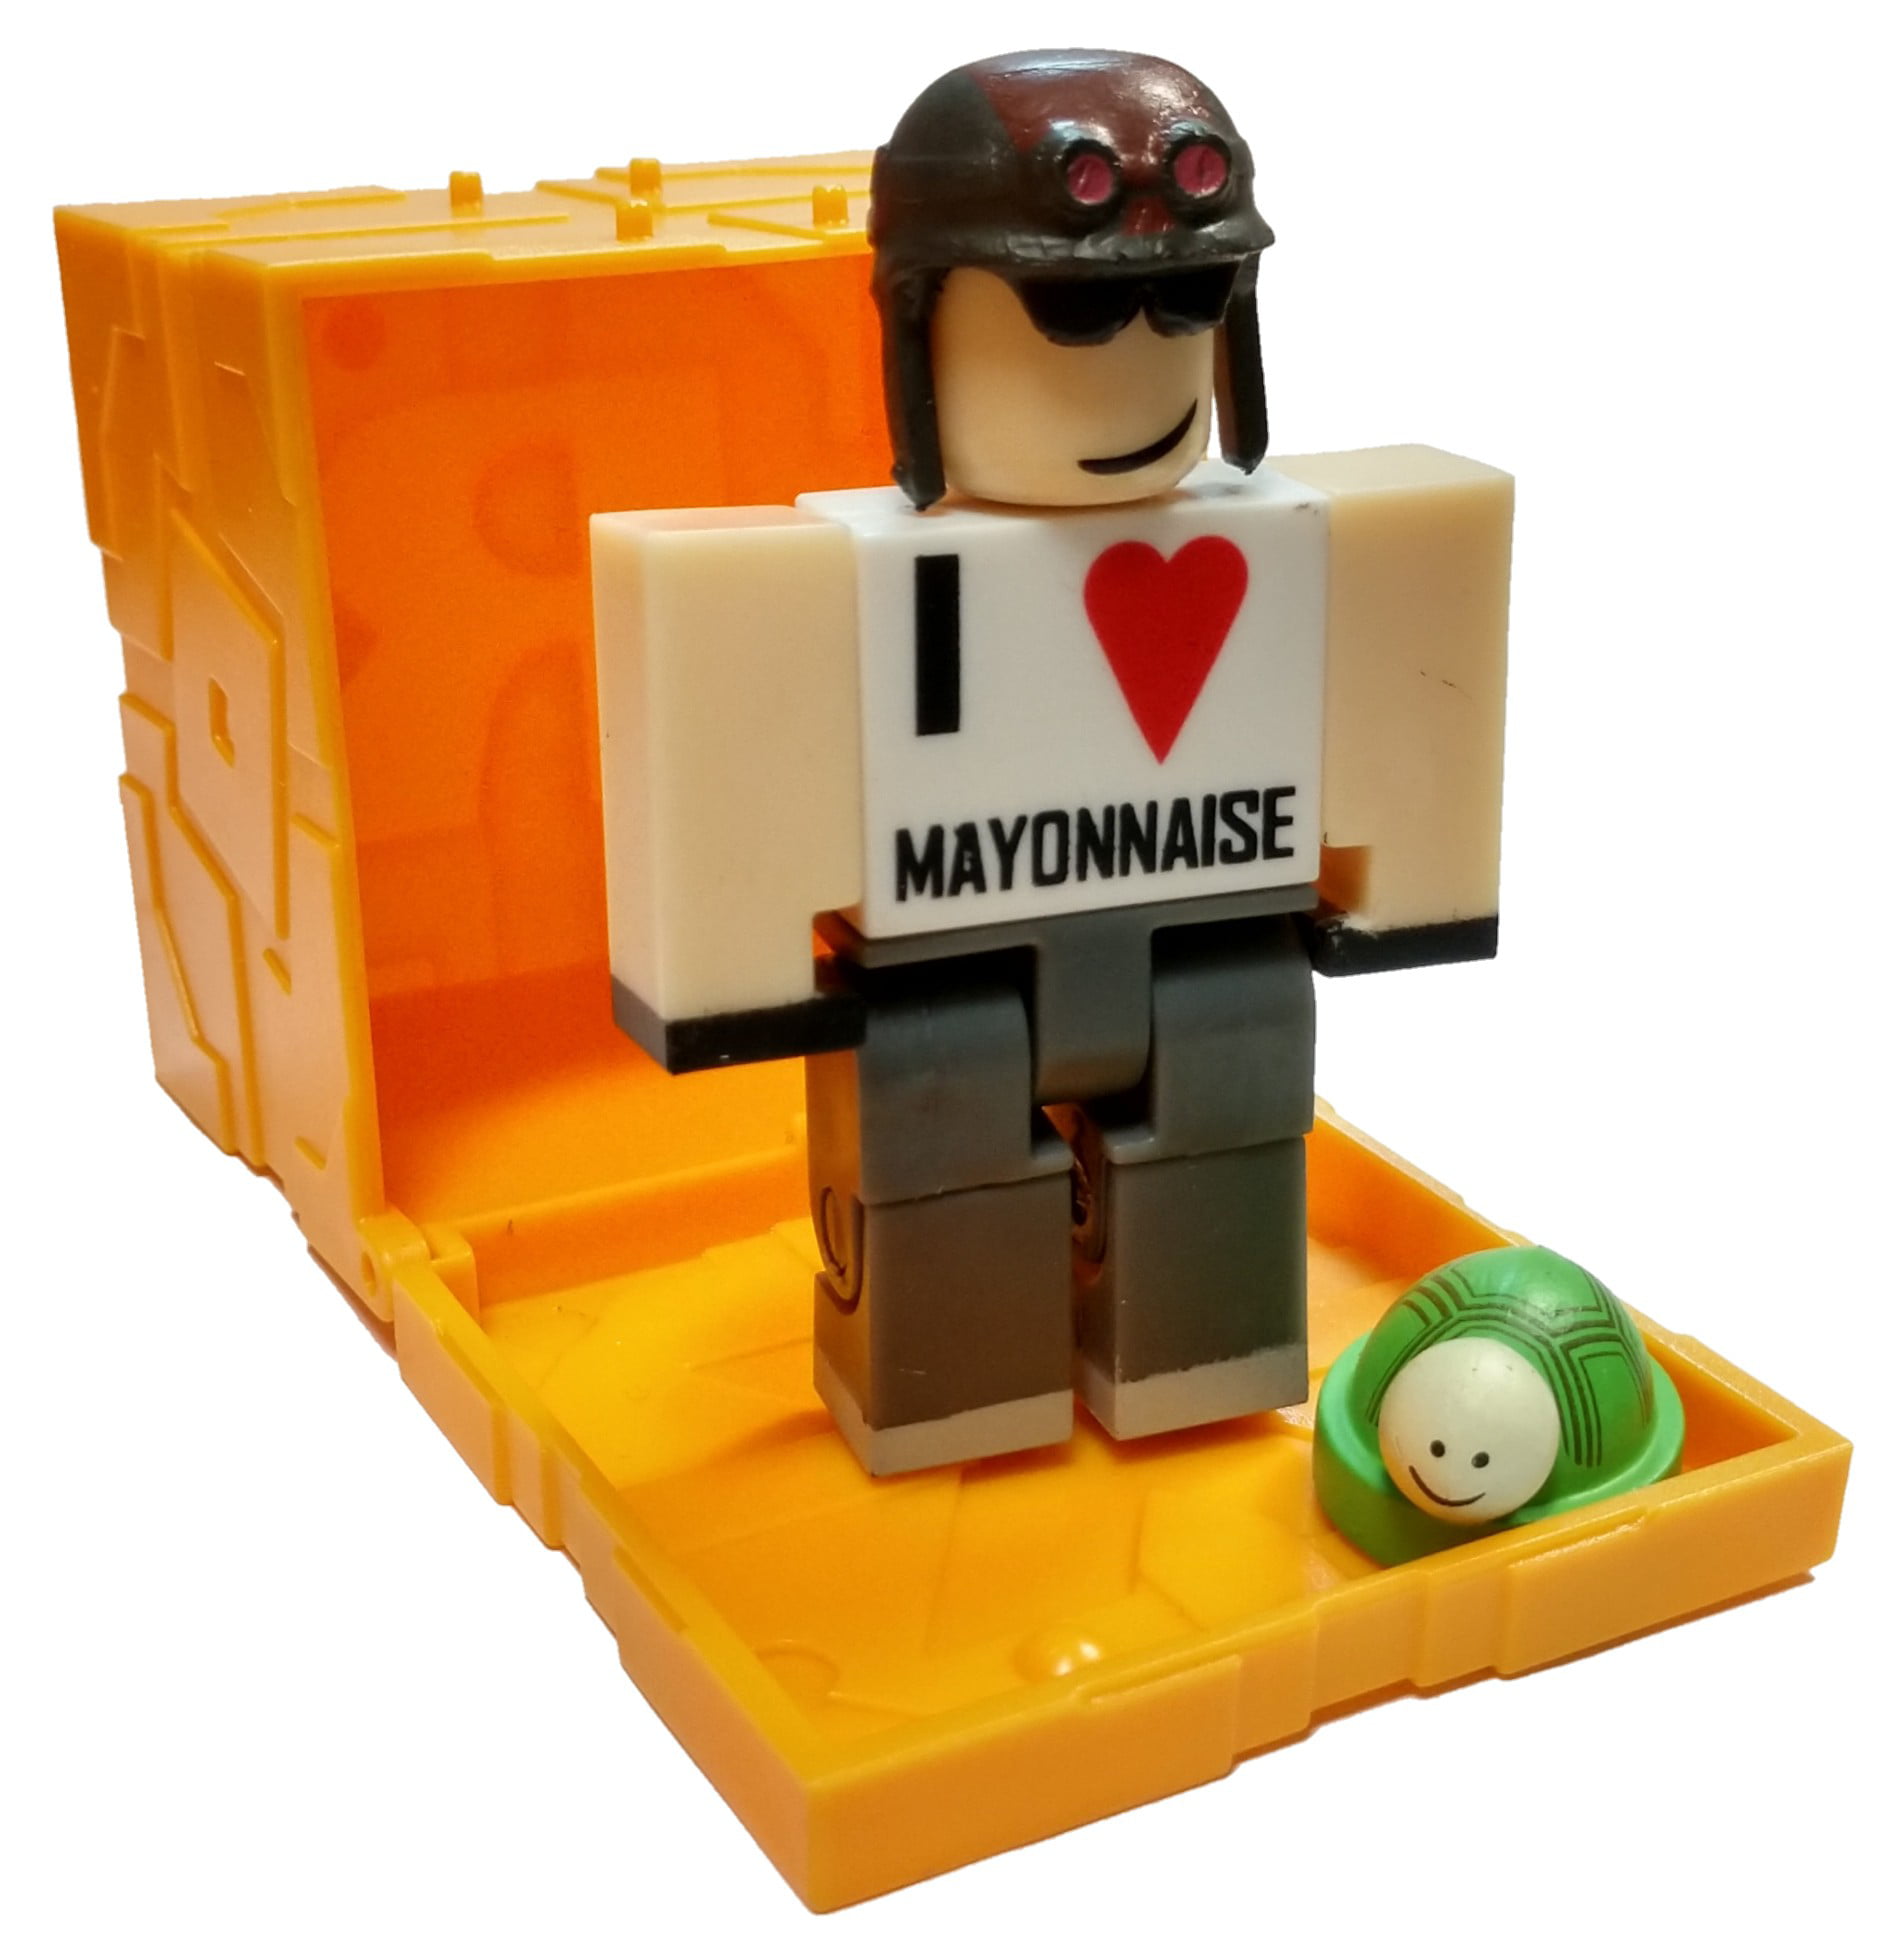 Roblox Series 5 Turtle Island Greg Mini Figure With Gold Cube And Online Code No Packaging Walmart Com Walmart Com - is series 5 of roblox toys out